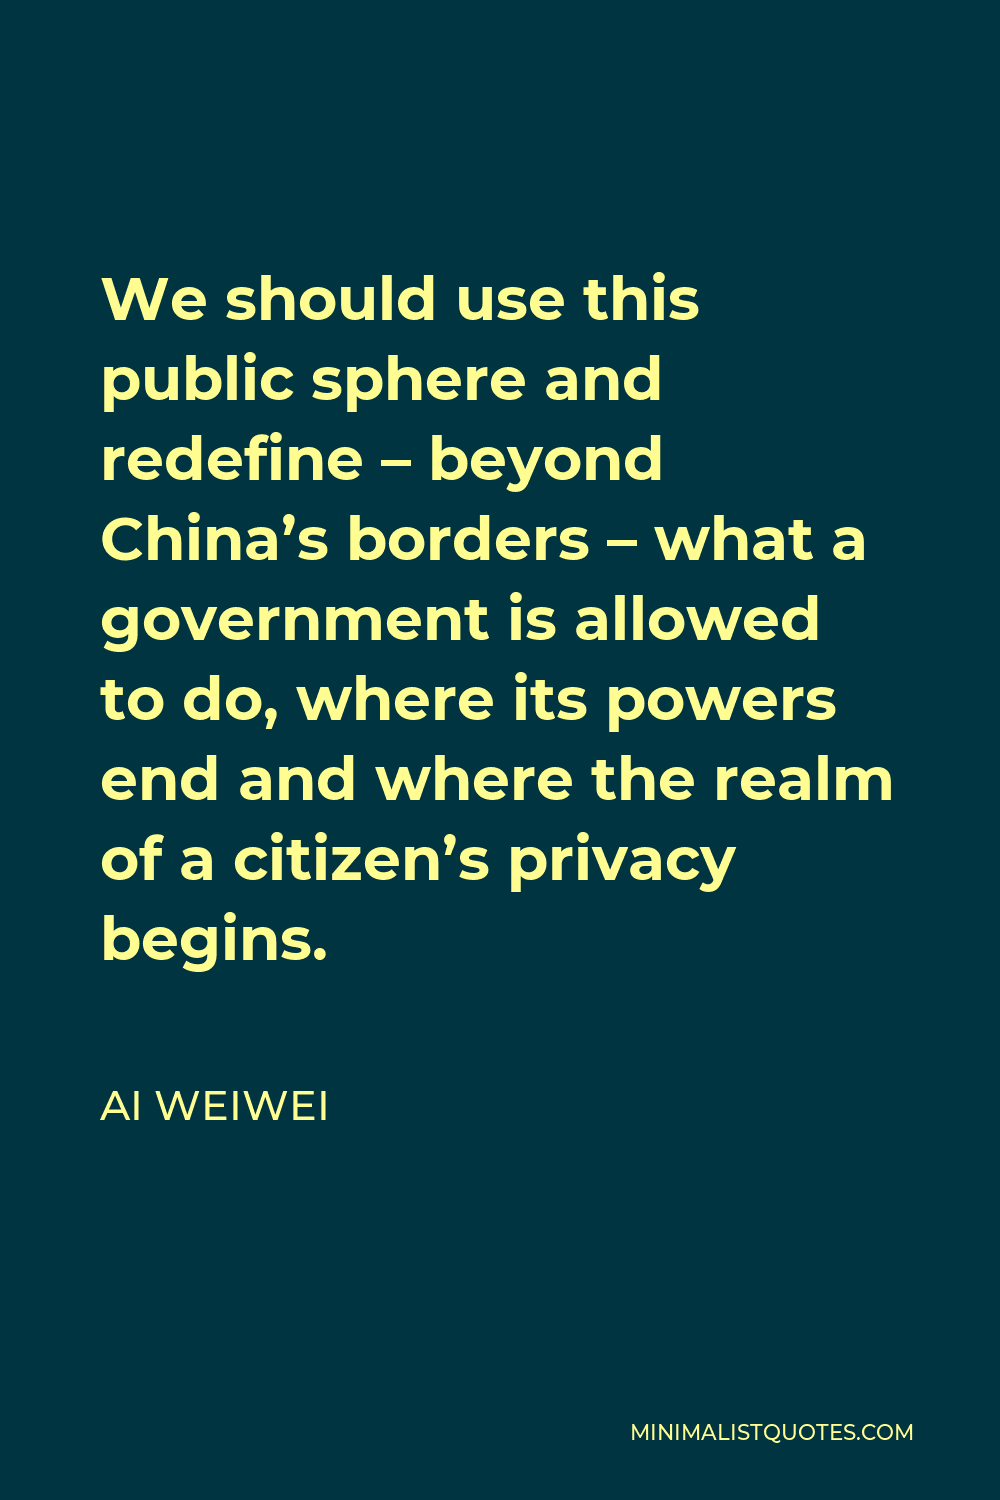 Ai Weiwei Quote - We should use this public sphere and redefine – beyond China’s borders – what a government is allowed to do, where its powers end and where the realm of a citizen’s privacy begins.